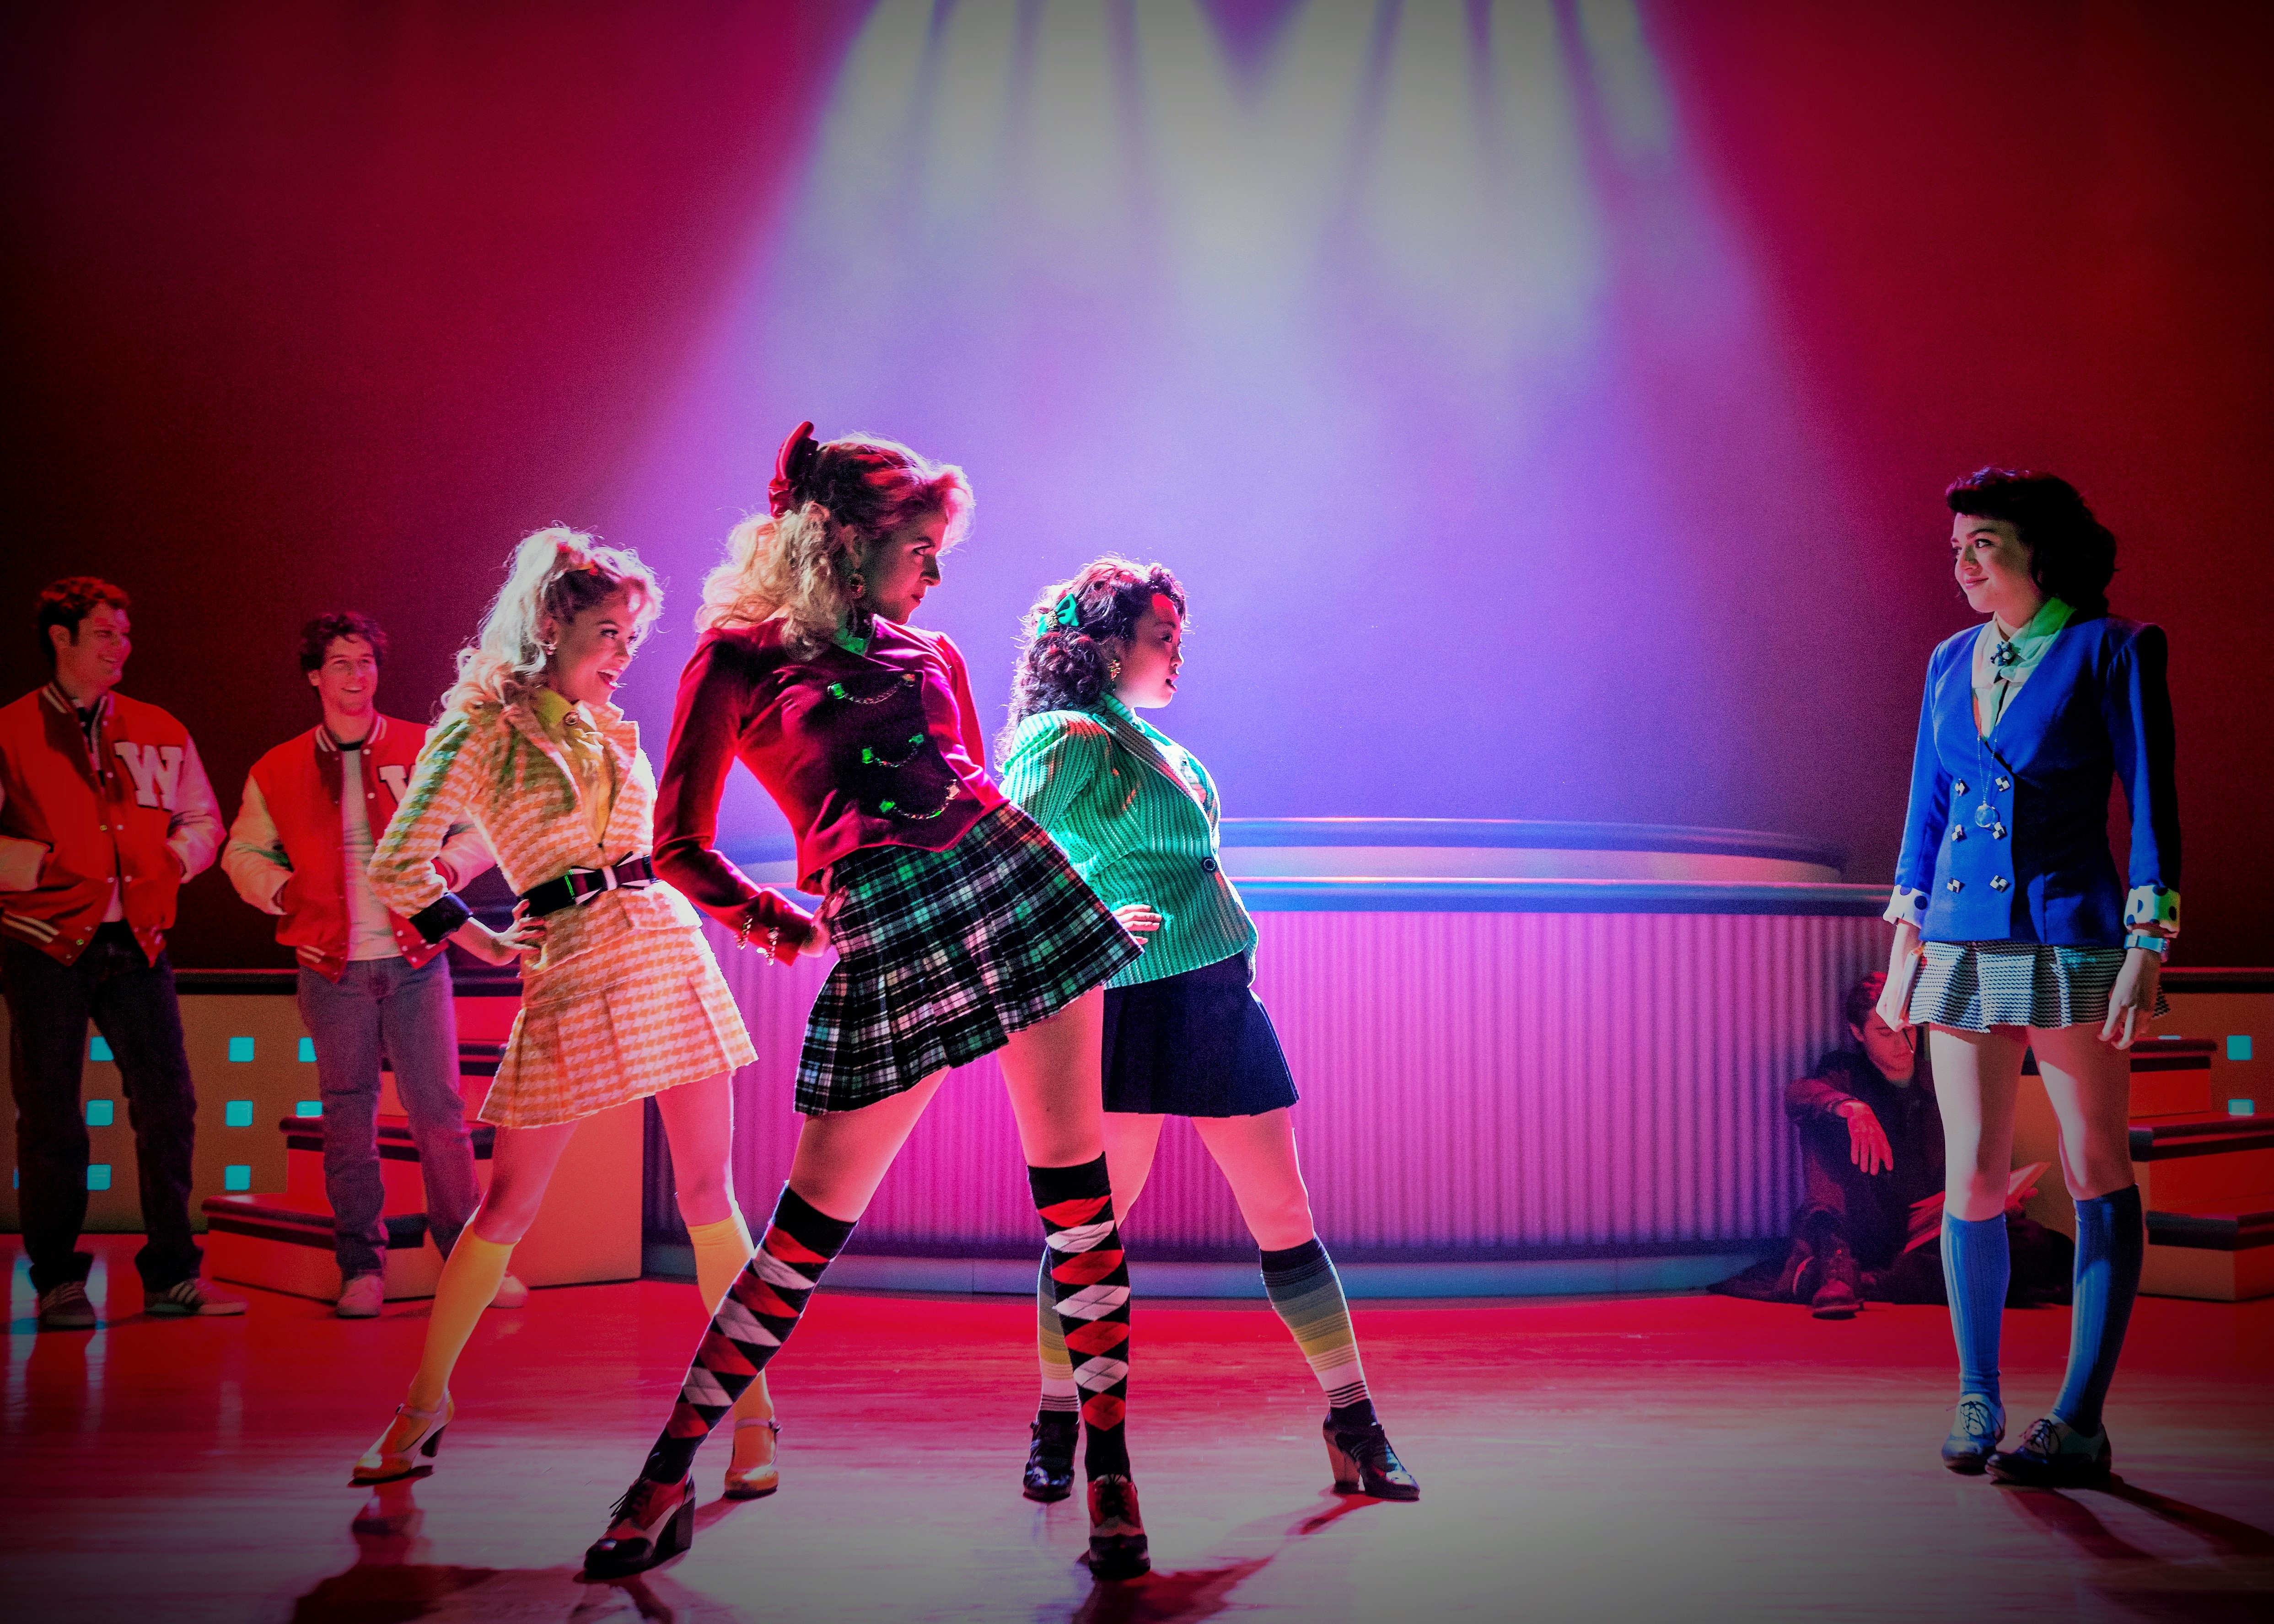 heathers wallpaper,entertainment,performance,performing arts,musical,dance